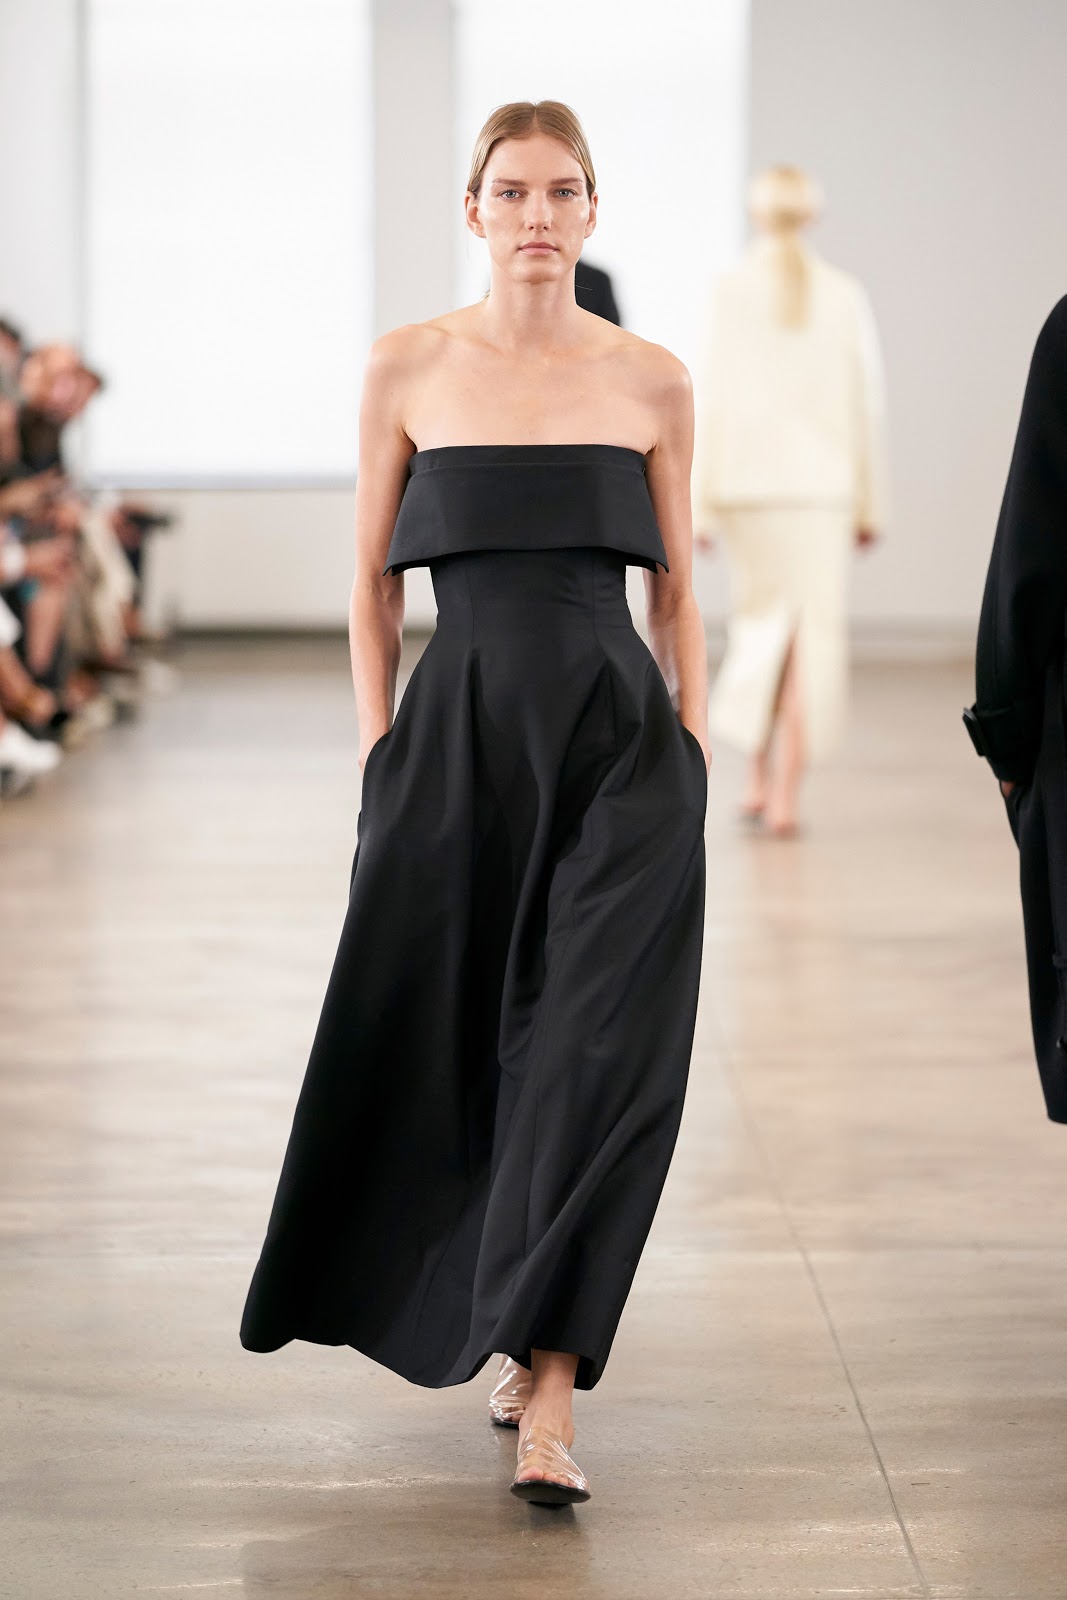 The Row Spring-Summer 2020 Ready-to-Wear NYFW | Cool Chic Style Fashion